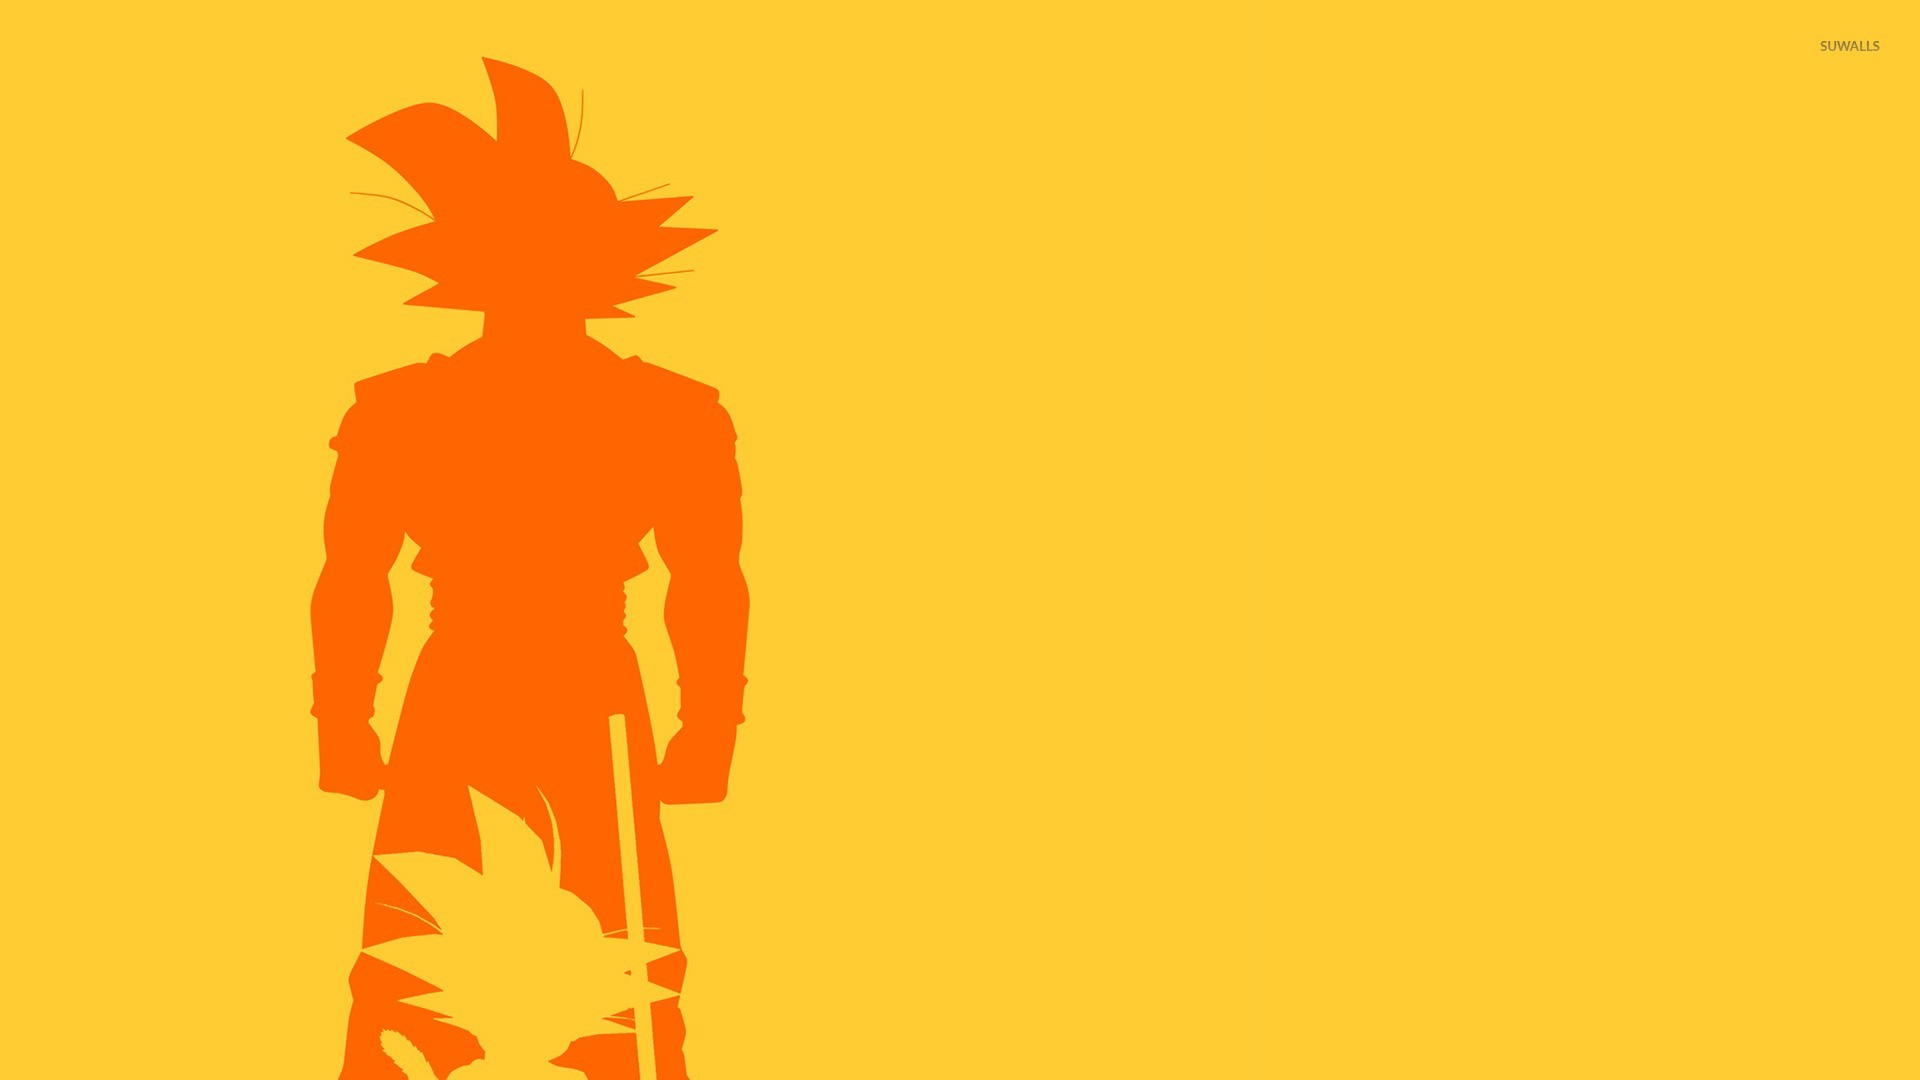 Goku Imagenes HD Wallpaper with image resolution 1920x1080 pixel. You can make this wallpaper for your Desktop Computer Backgrounds, Mac Wallpapers, Android Lock screen or iPhone Screensavers